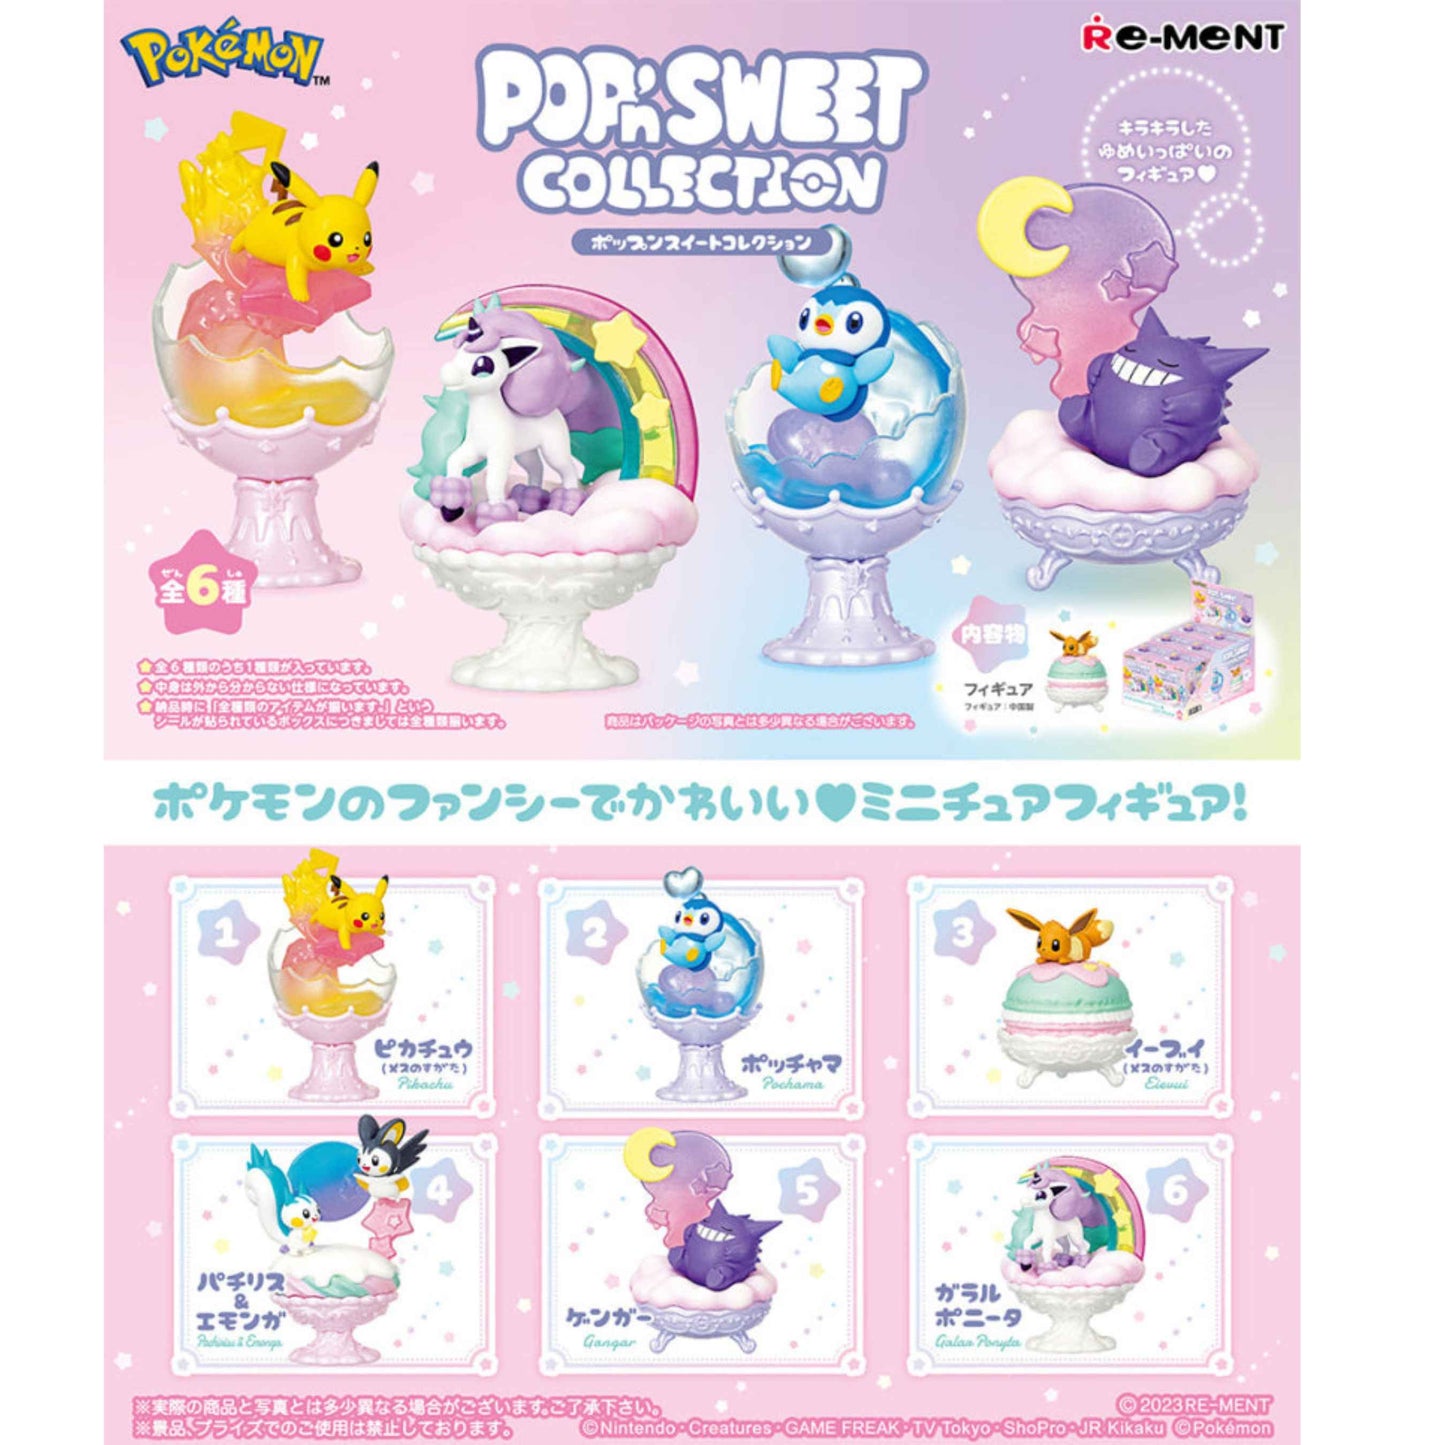 Re-ment: Pokémon Pop'n Sweet Collection Series Blind Box - Whole Set of 6